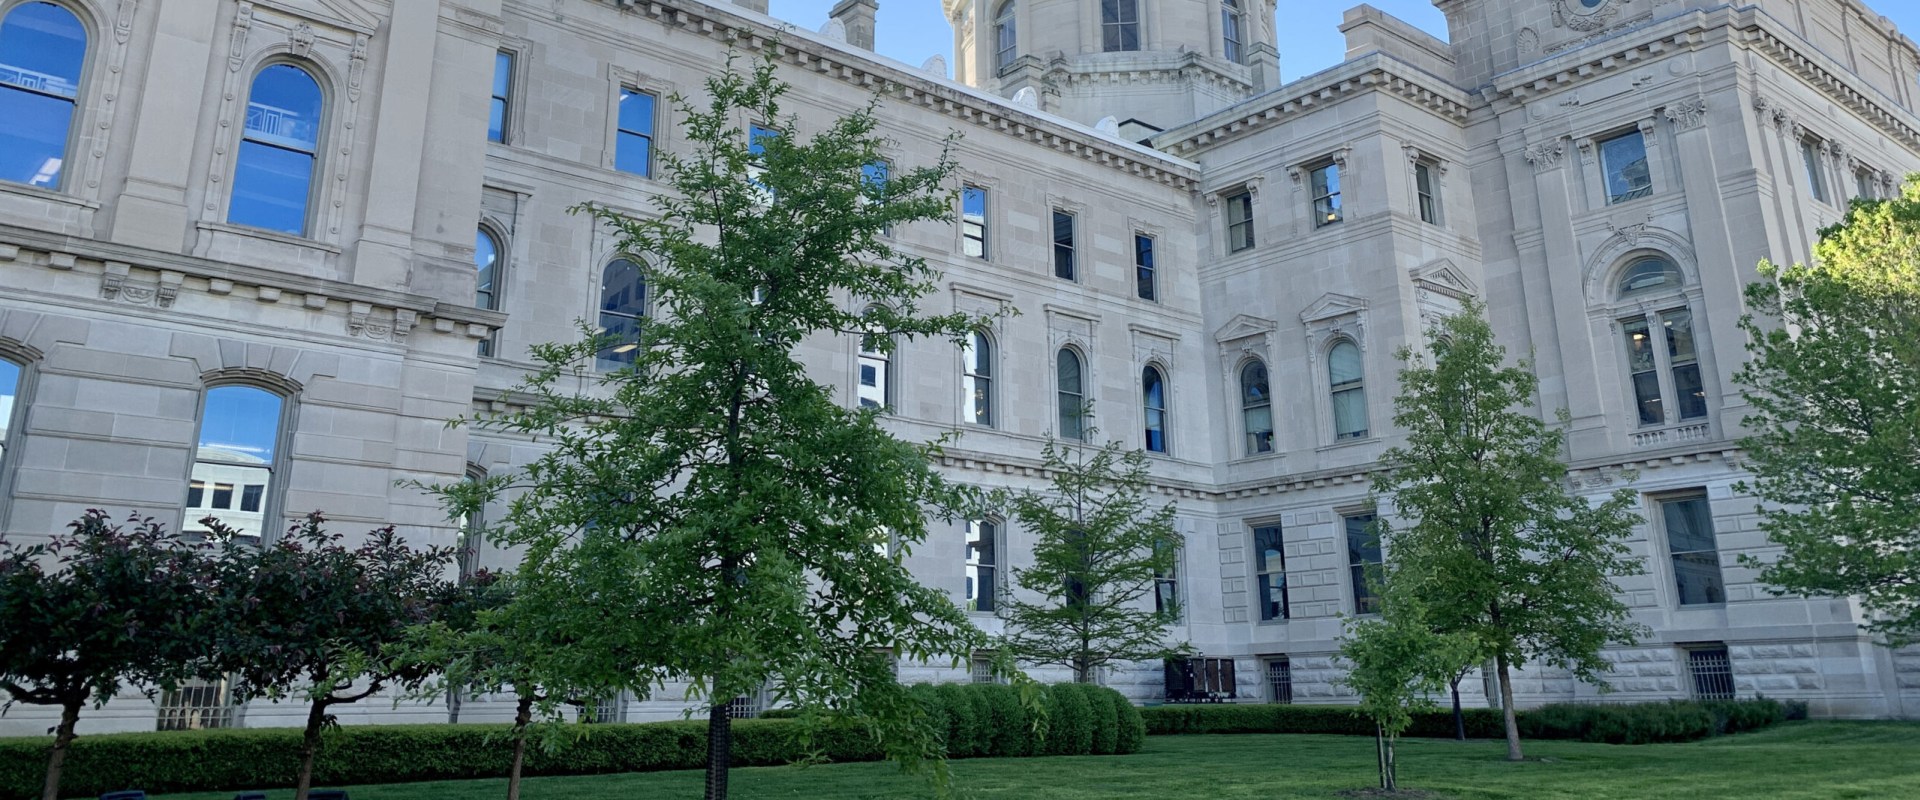 Public Nudity Laws in Indianapolis, Indiana: What You Need to Know